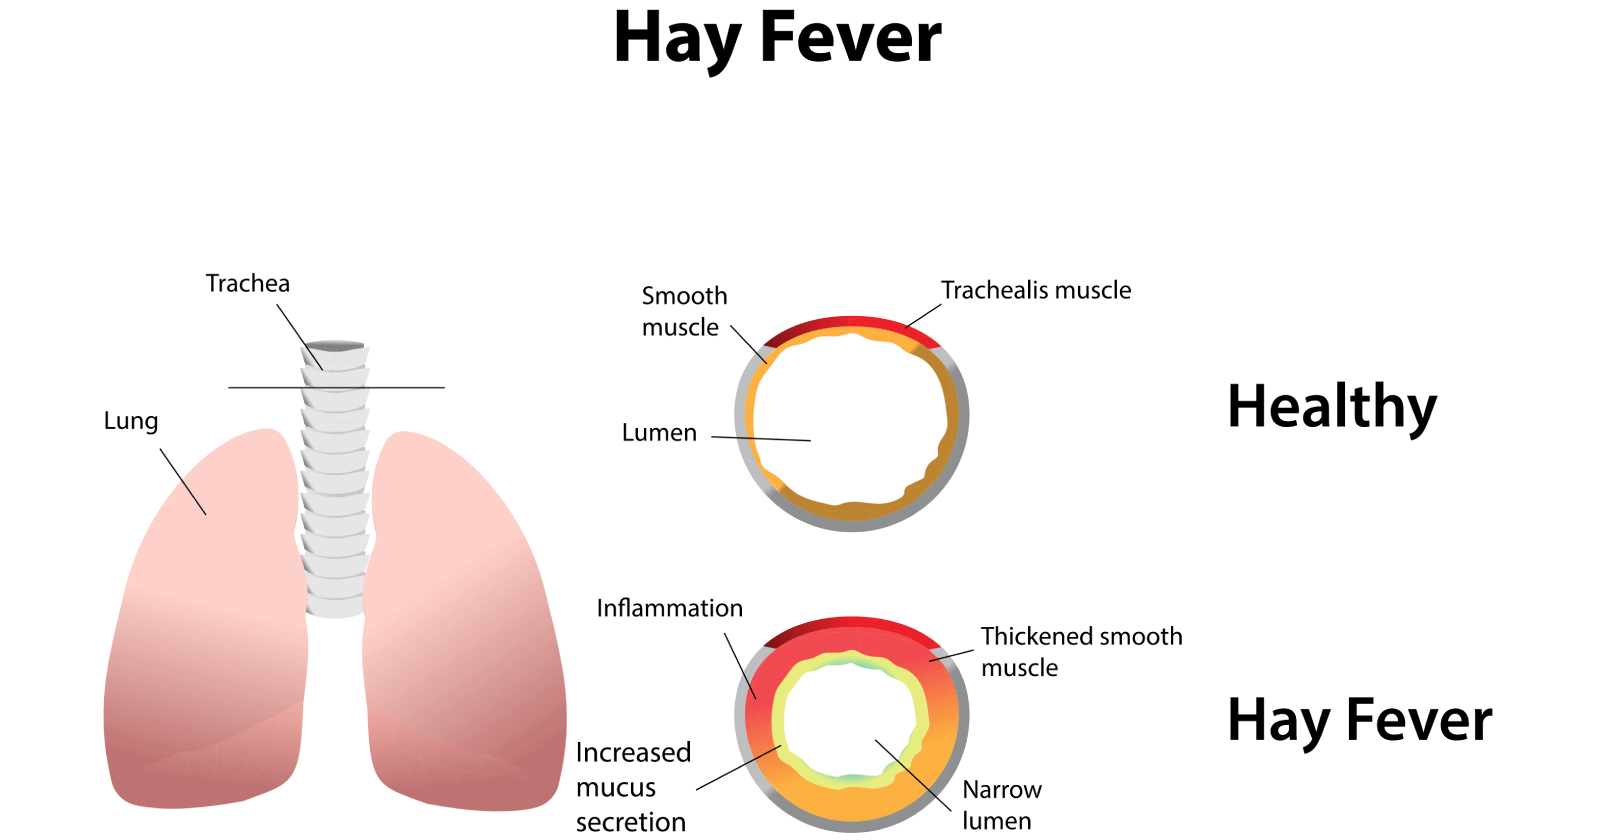 Overview of Hay Fever: Causes, symptoms, treatments and natural remedies